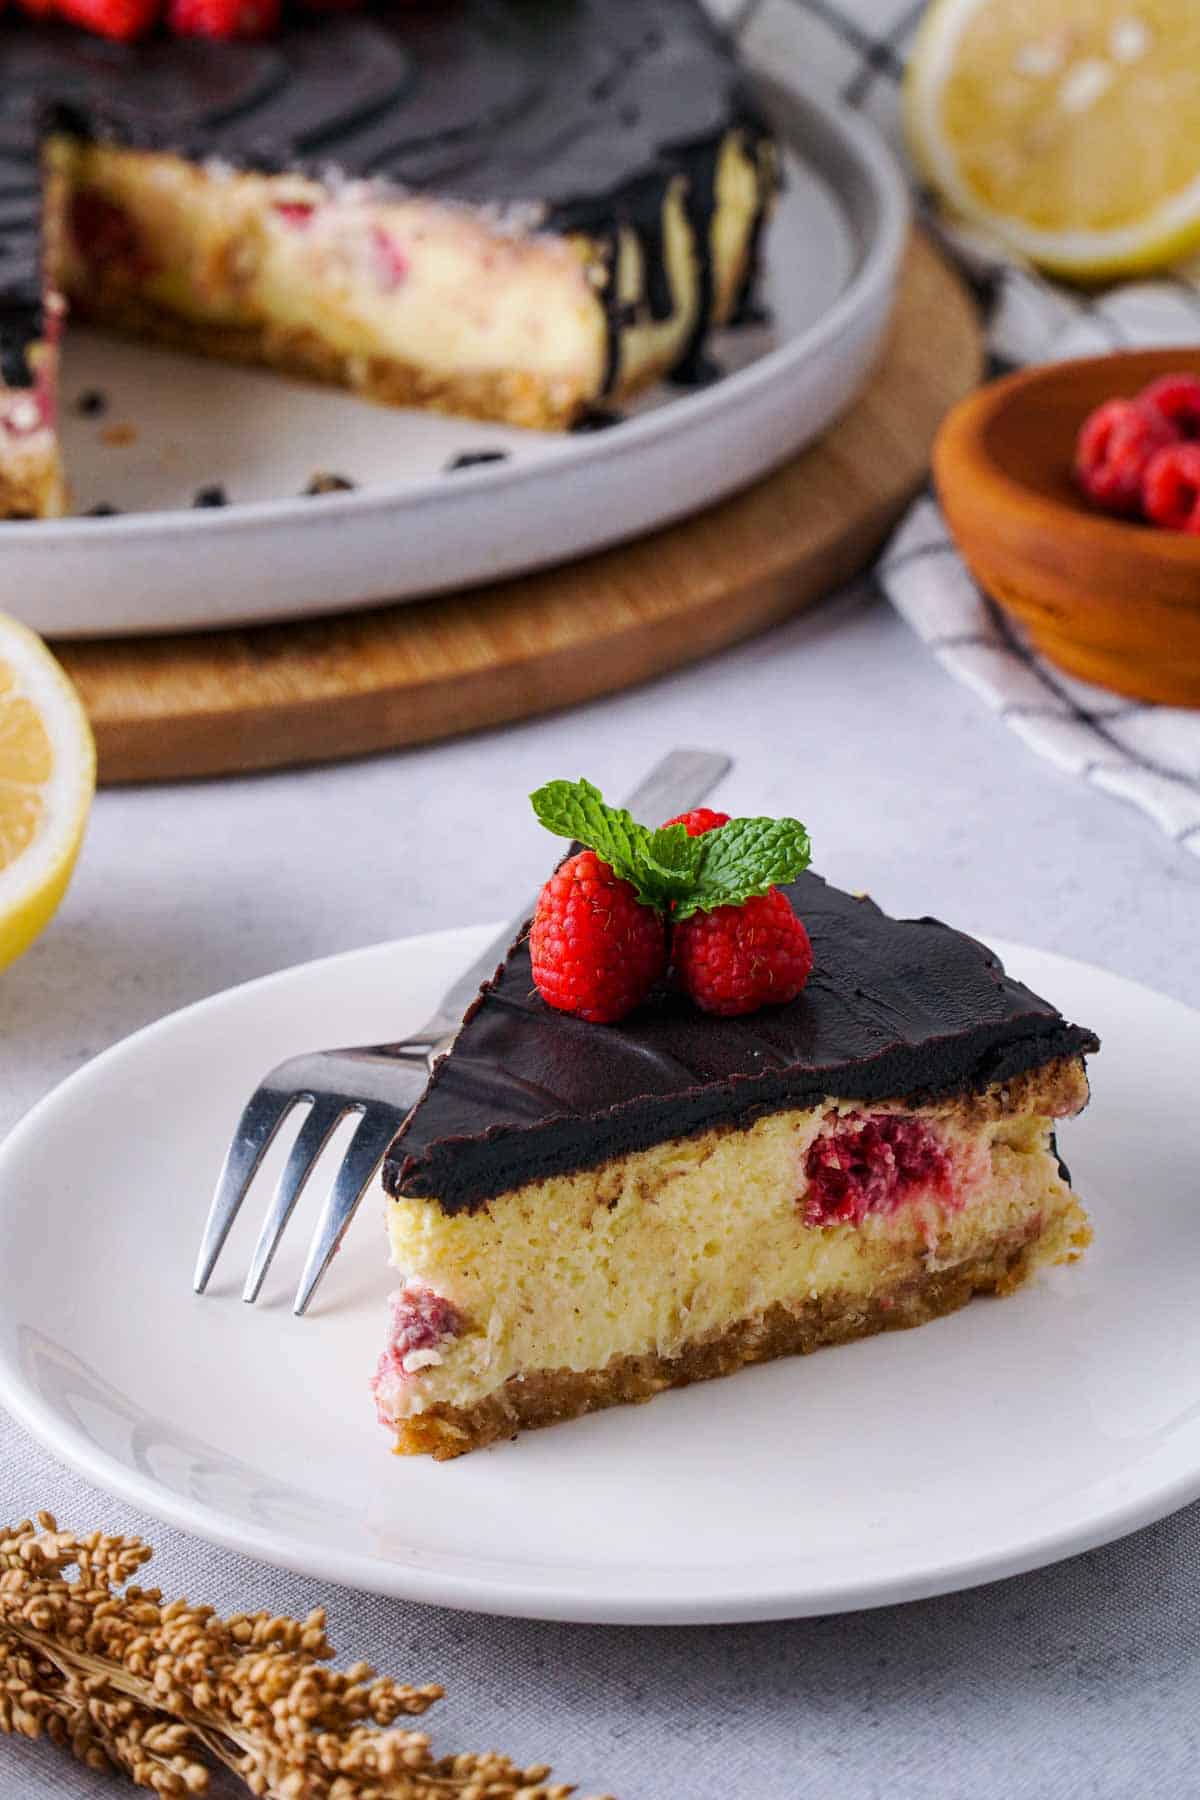 A slice of cheesecake on a plate. It is covered with chocolate ganache and filled with raspberries. In the background, some ingredients and more cake can be seen.